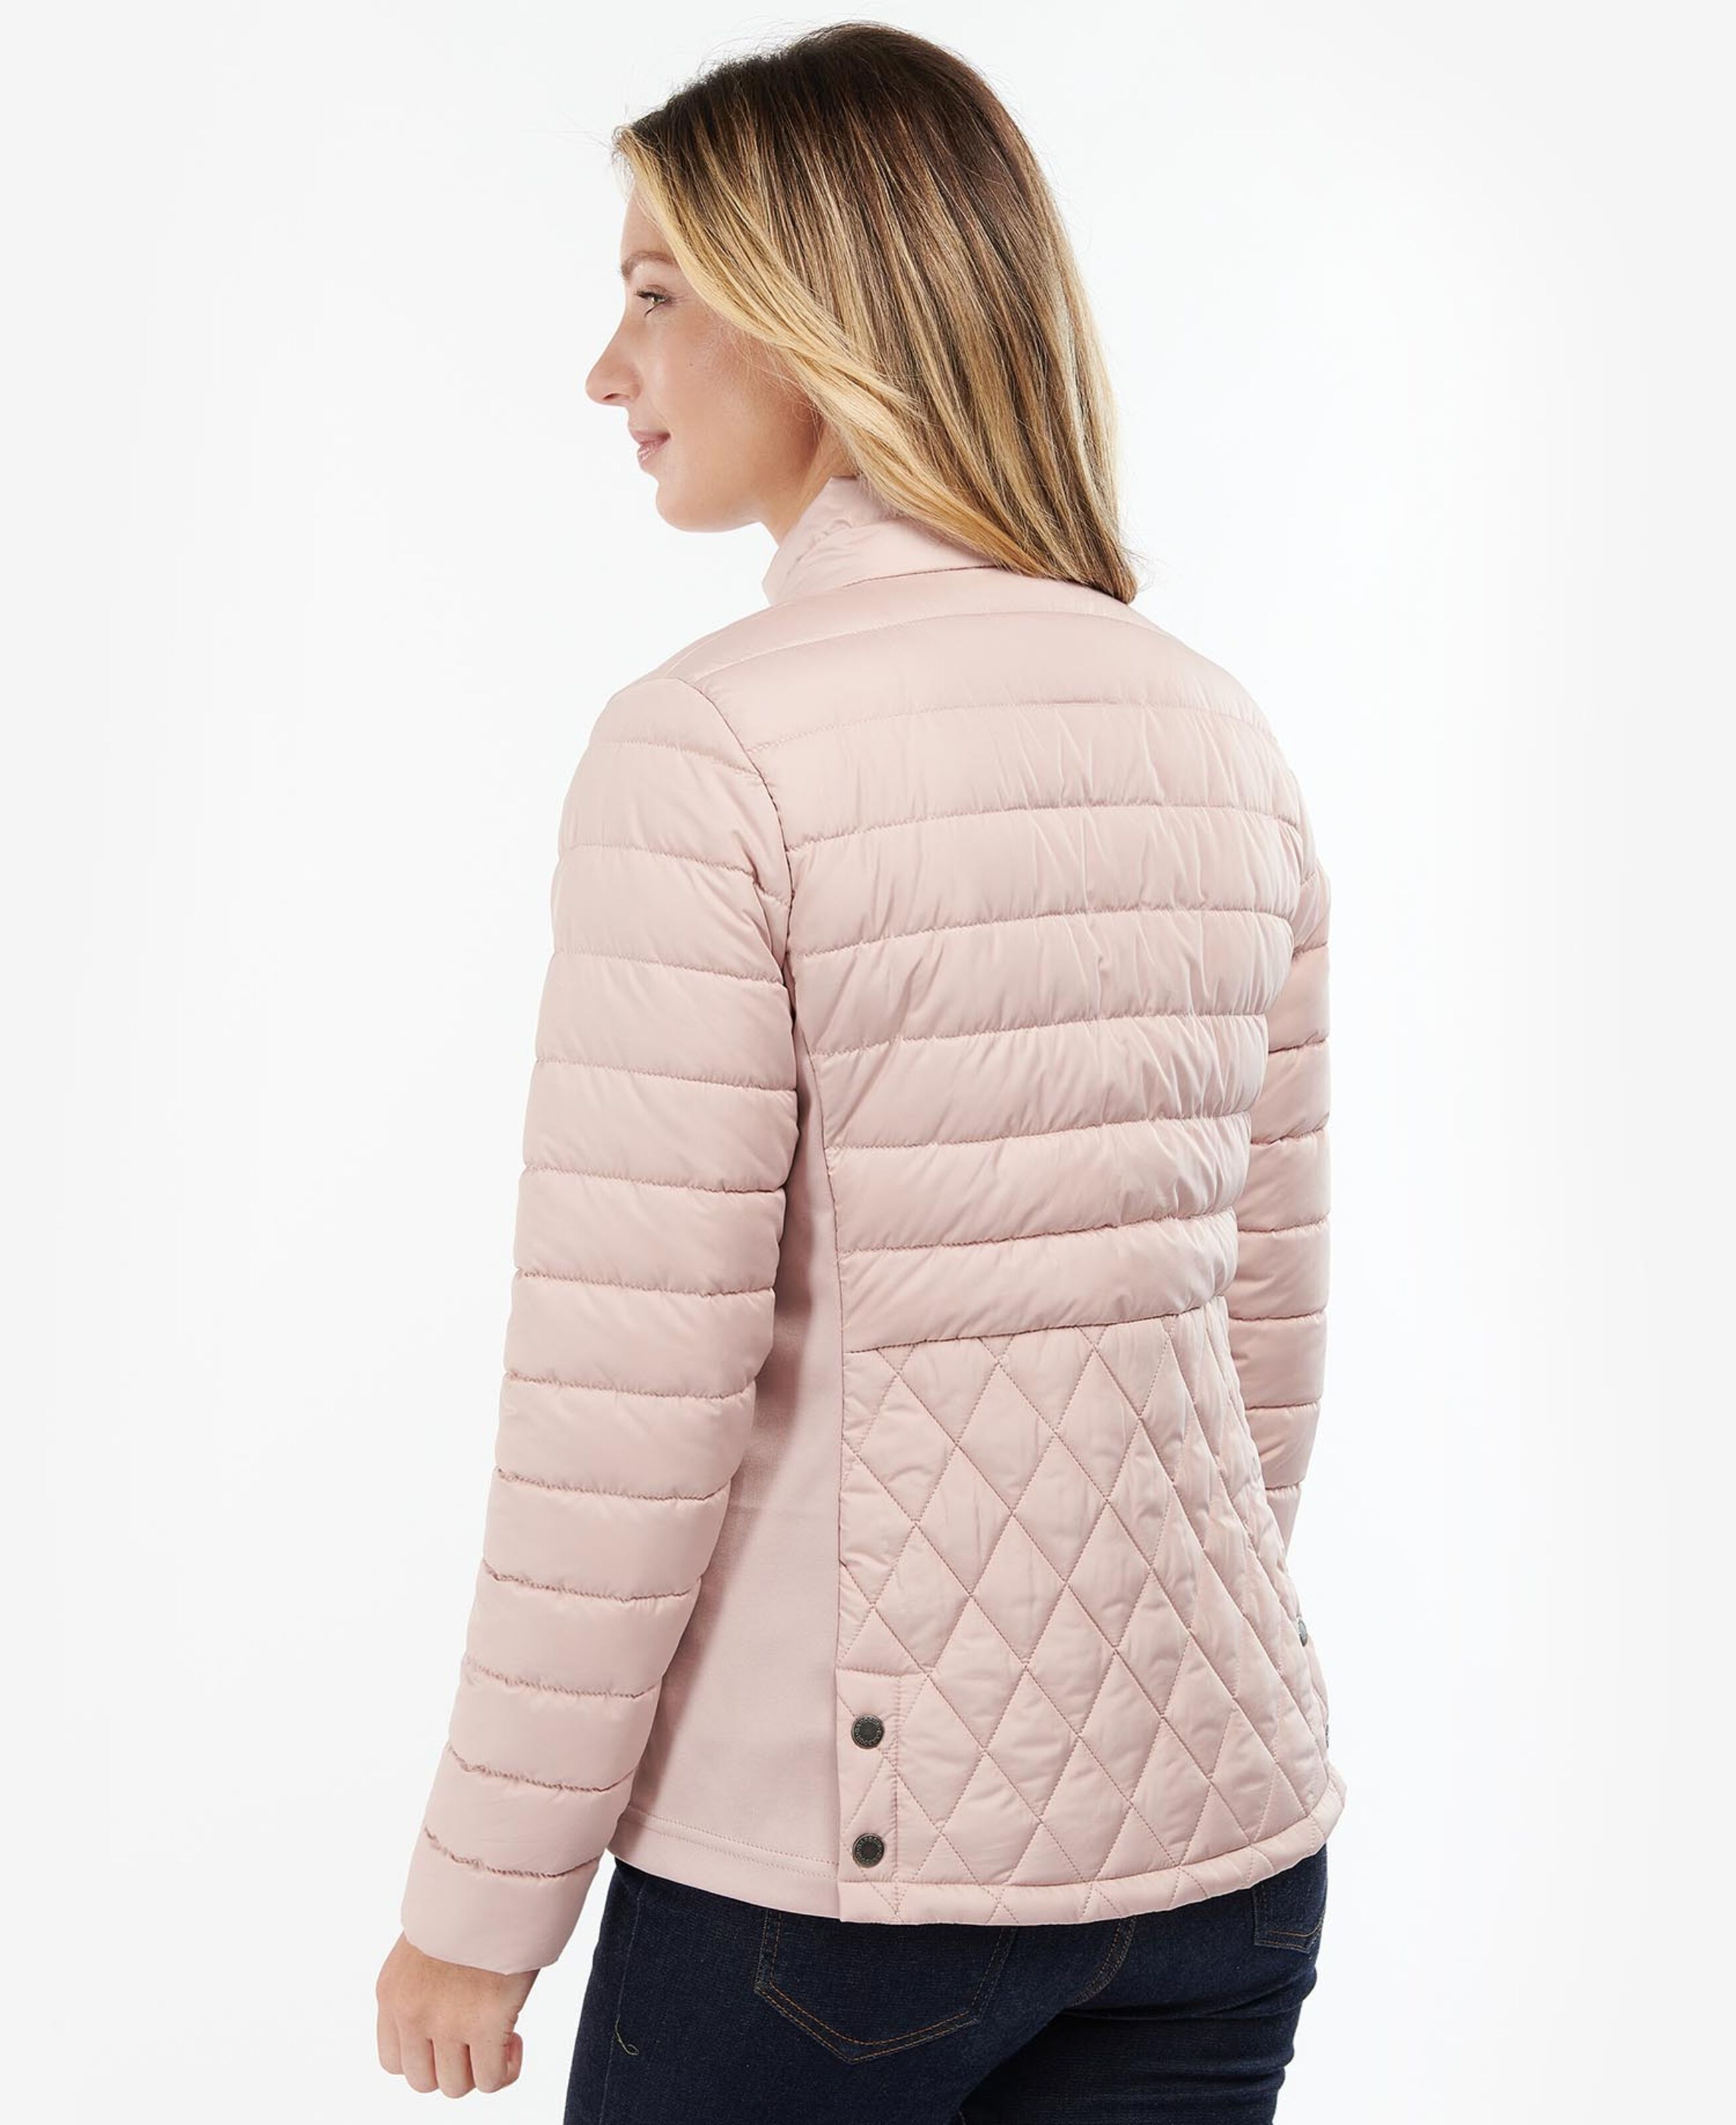 Barbour Esme Quilted Jacket for Her